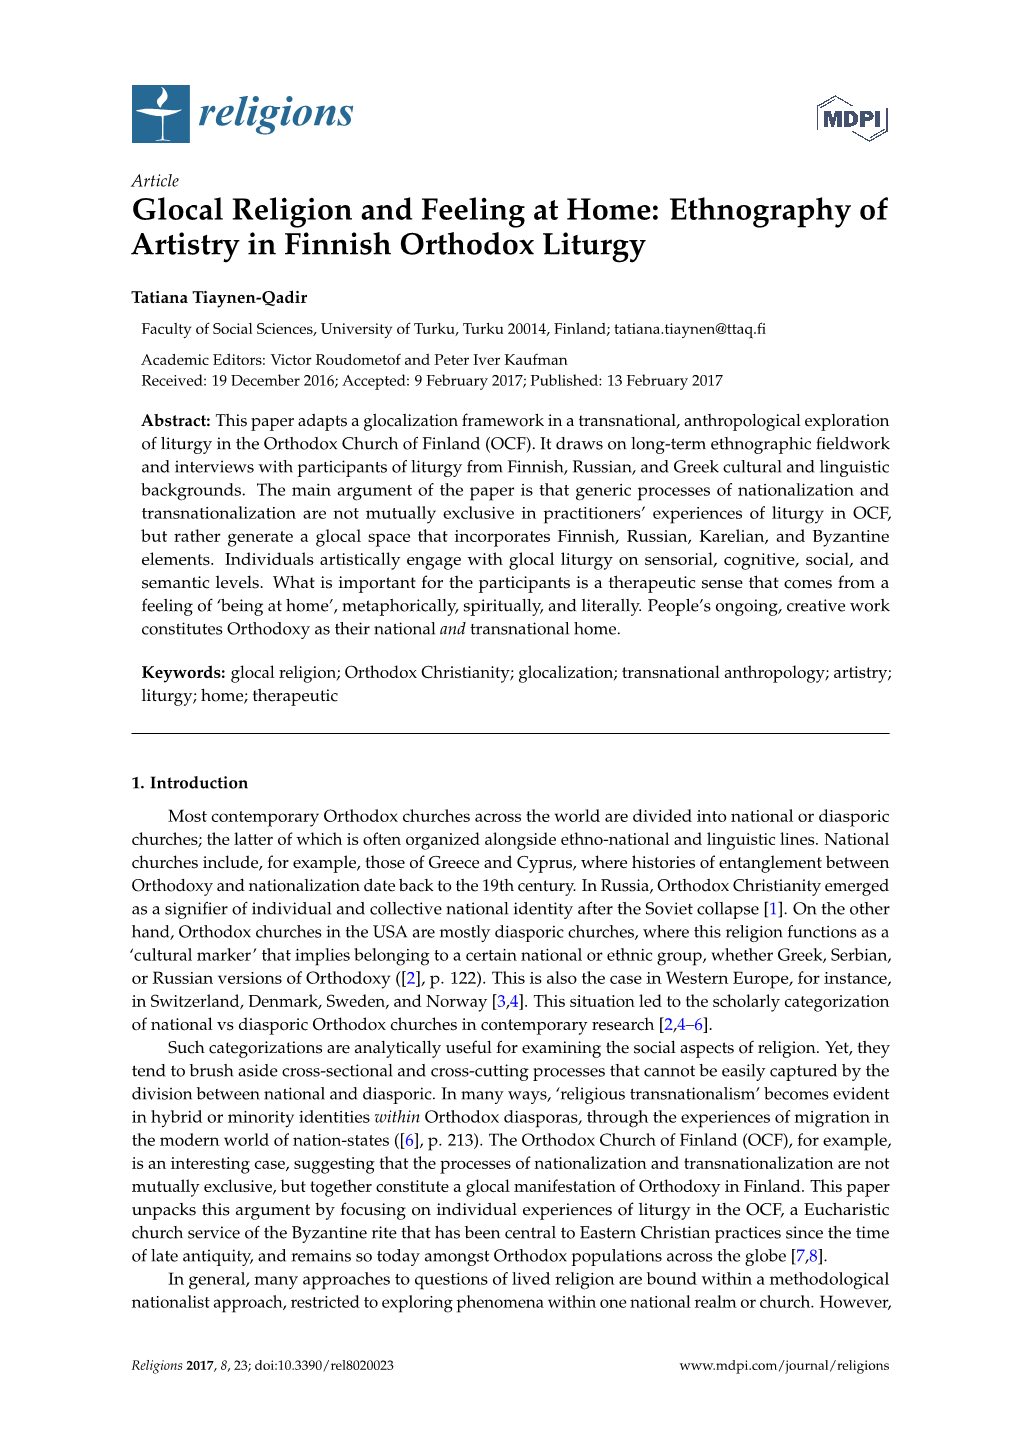 Glocal Religion and Feeling at Home: Ethnography of Artistry in Finnish Orthodox Liturgy